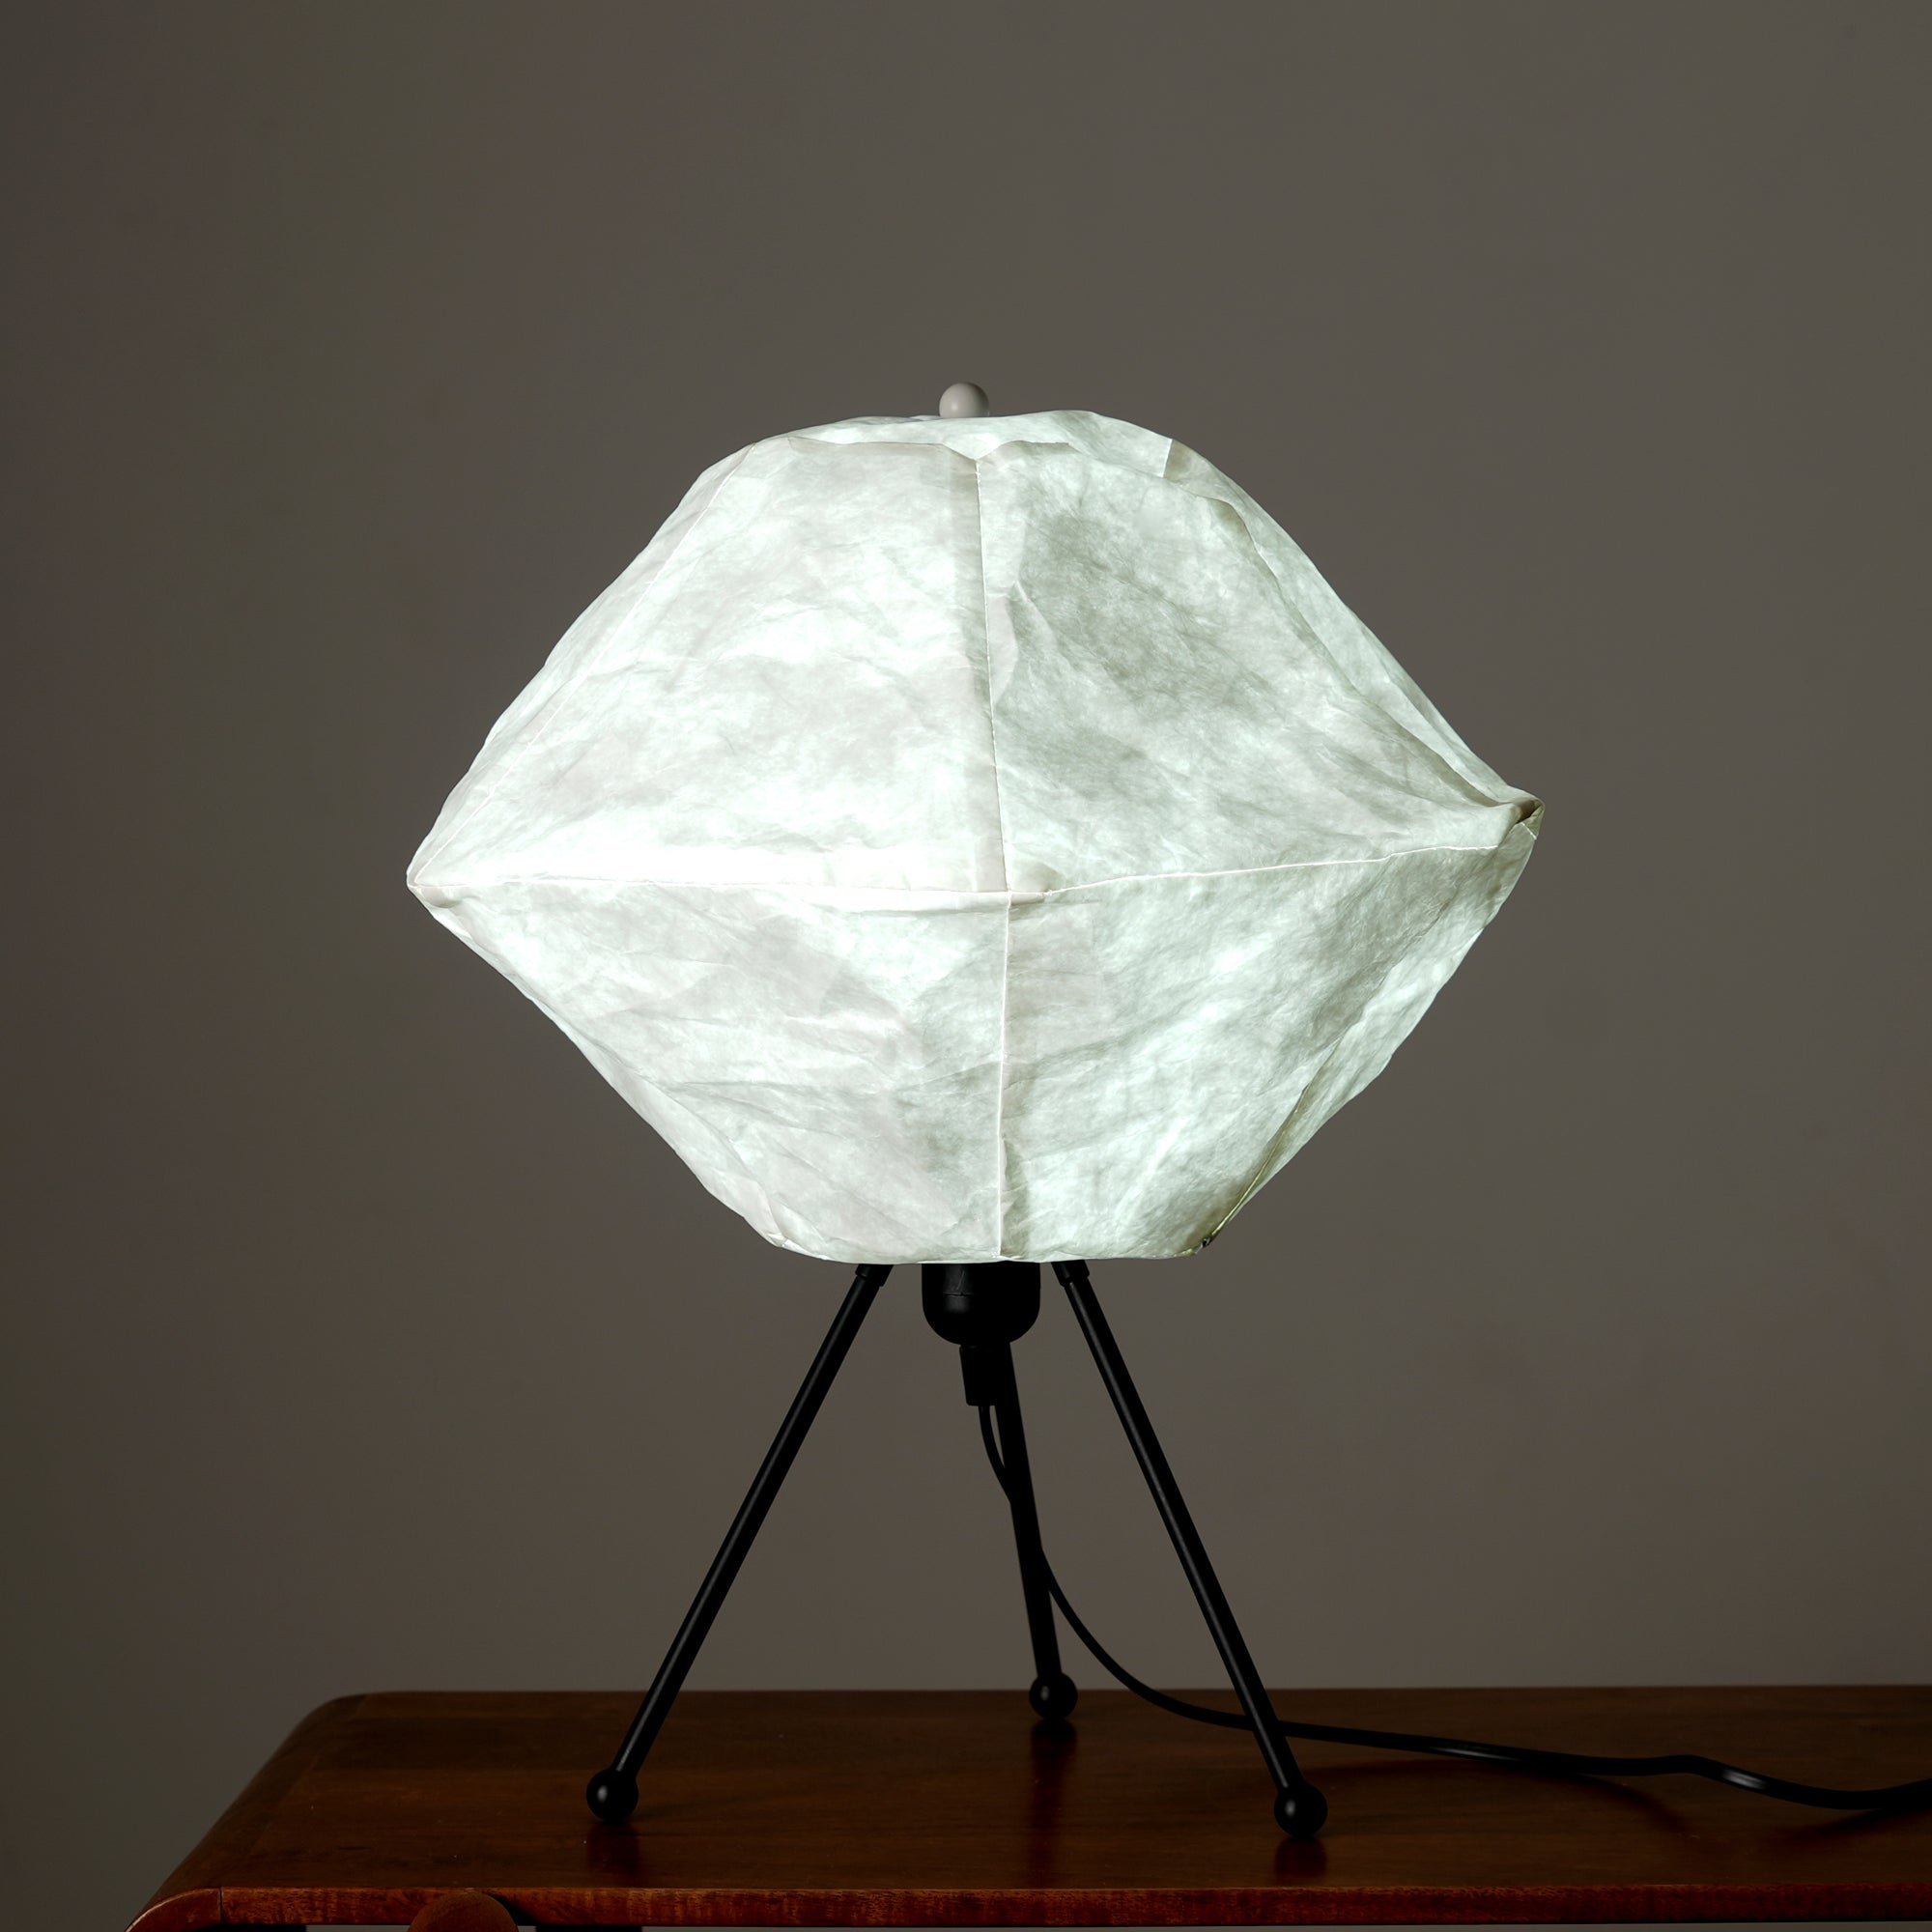 Luna Table Lamp - Tripod Table Lamp, Innovative Handcrafted Design, Recycled Polyethylene and Metal